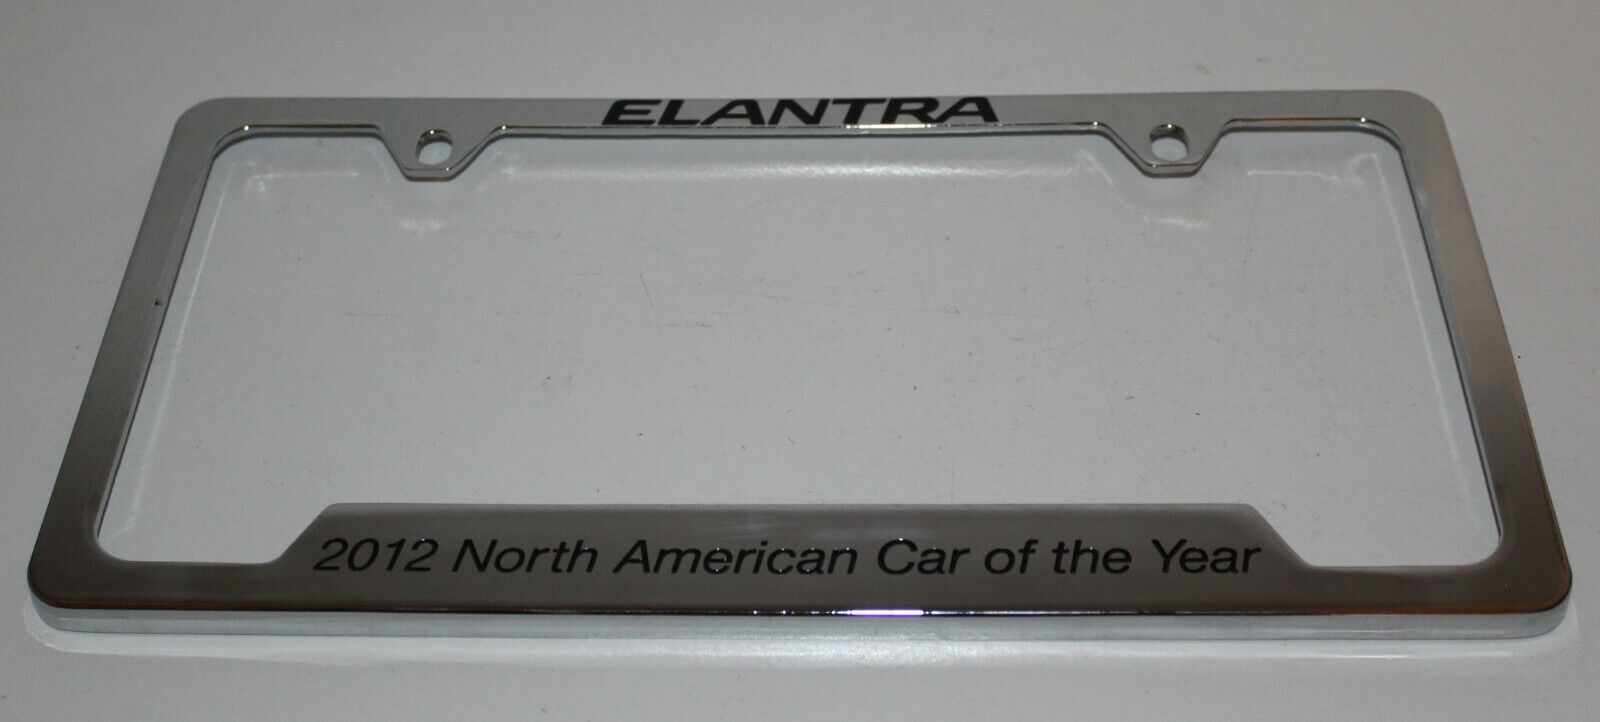 New Elantra  2012 North American Car of the Year License Plate Frame